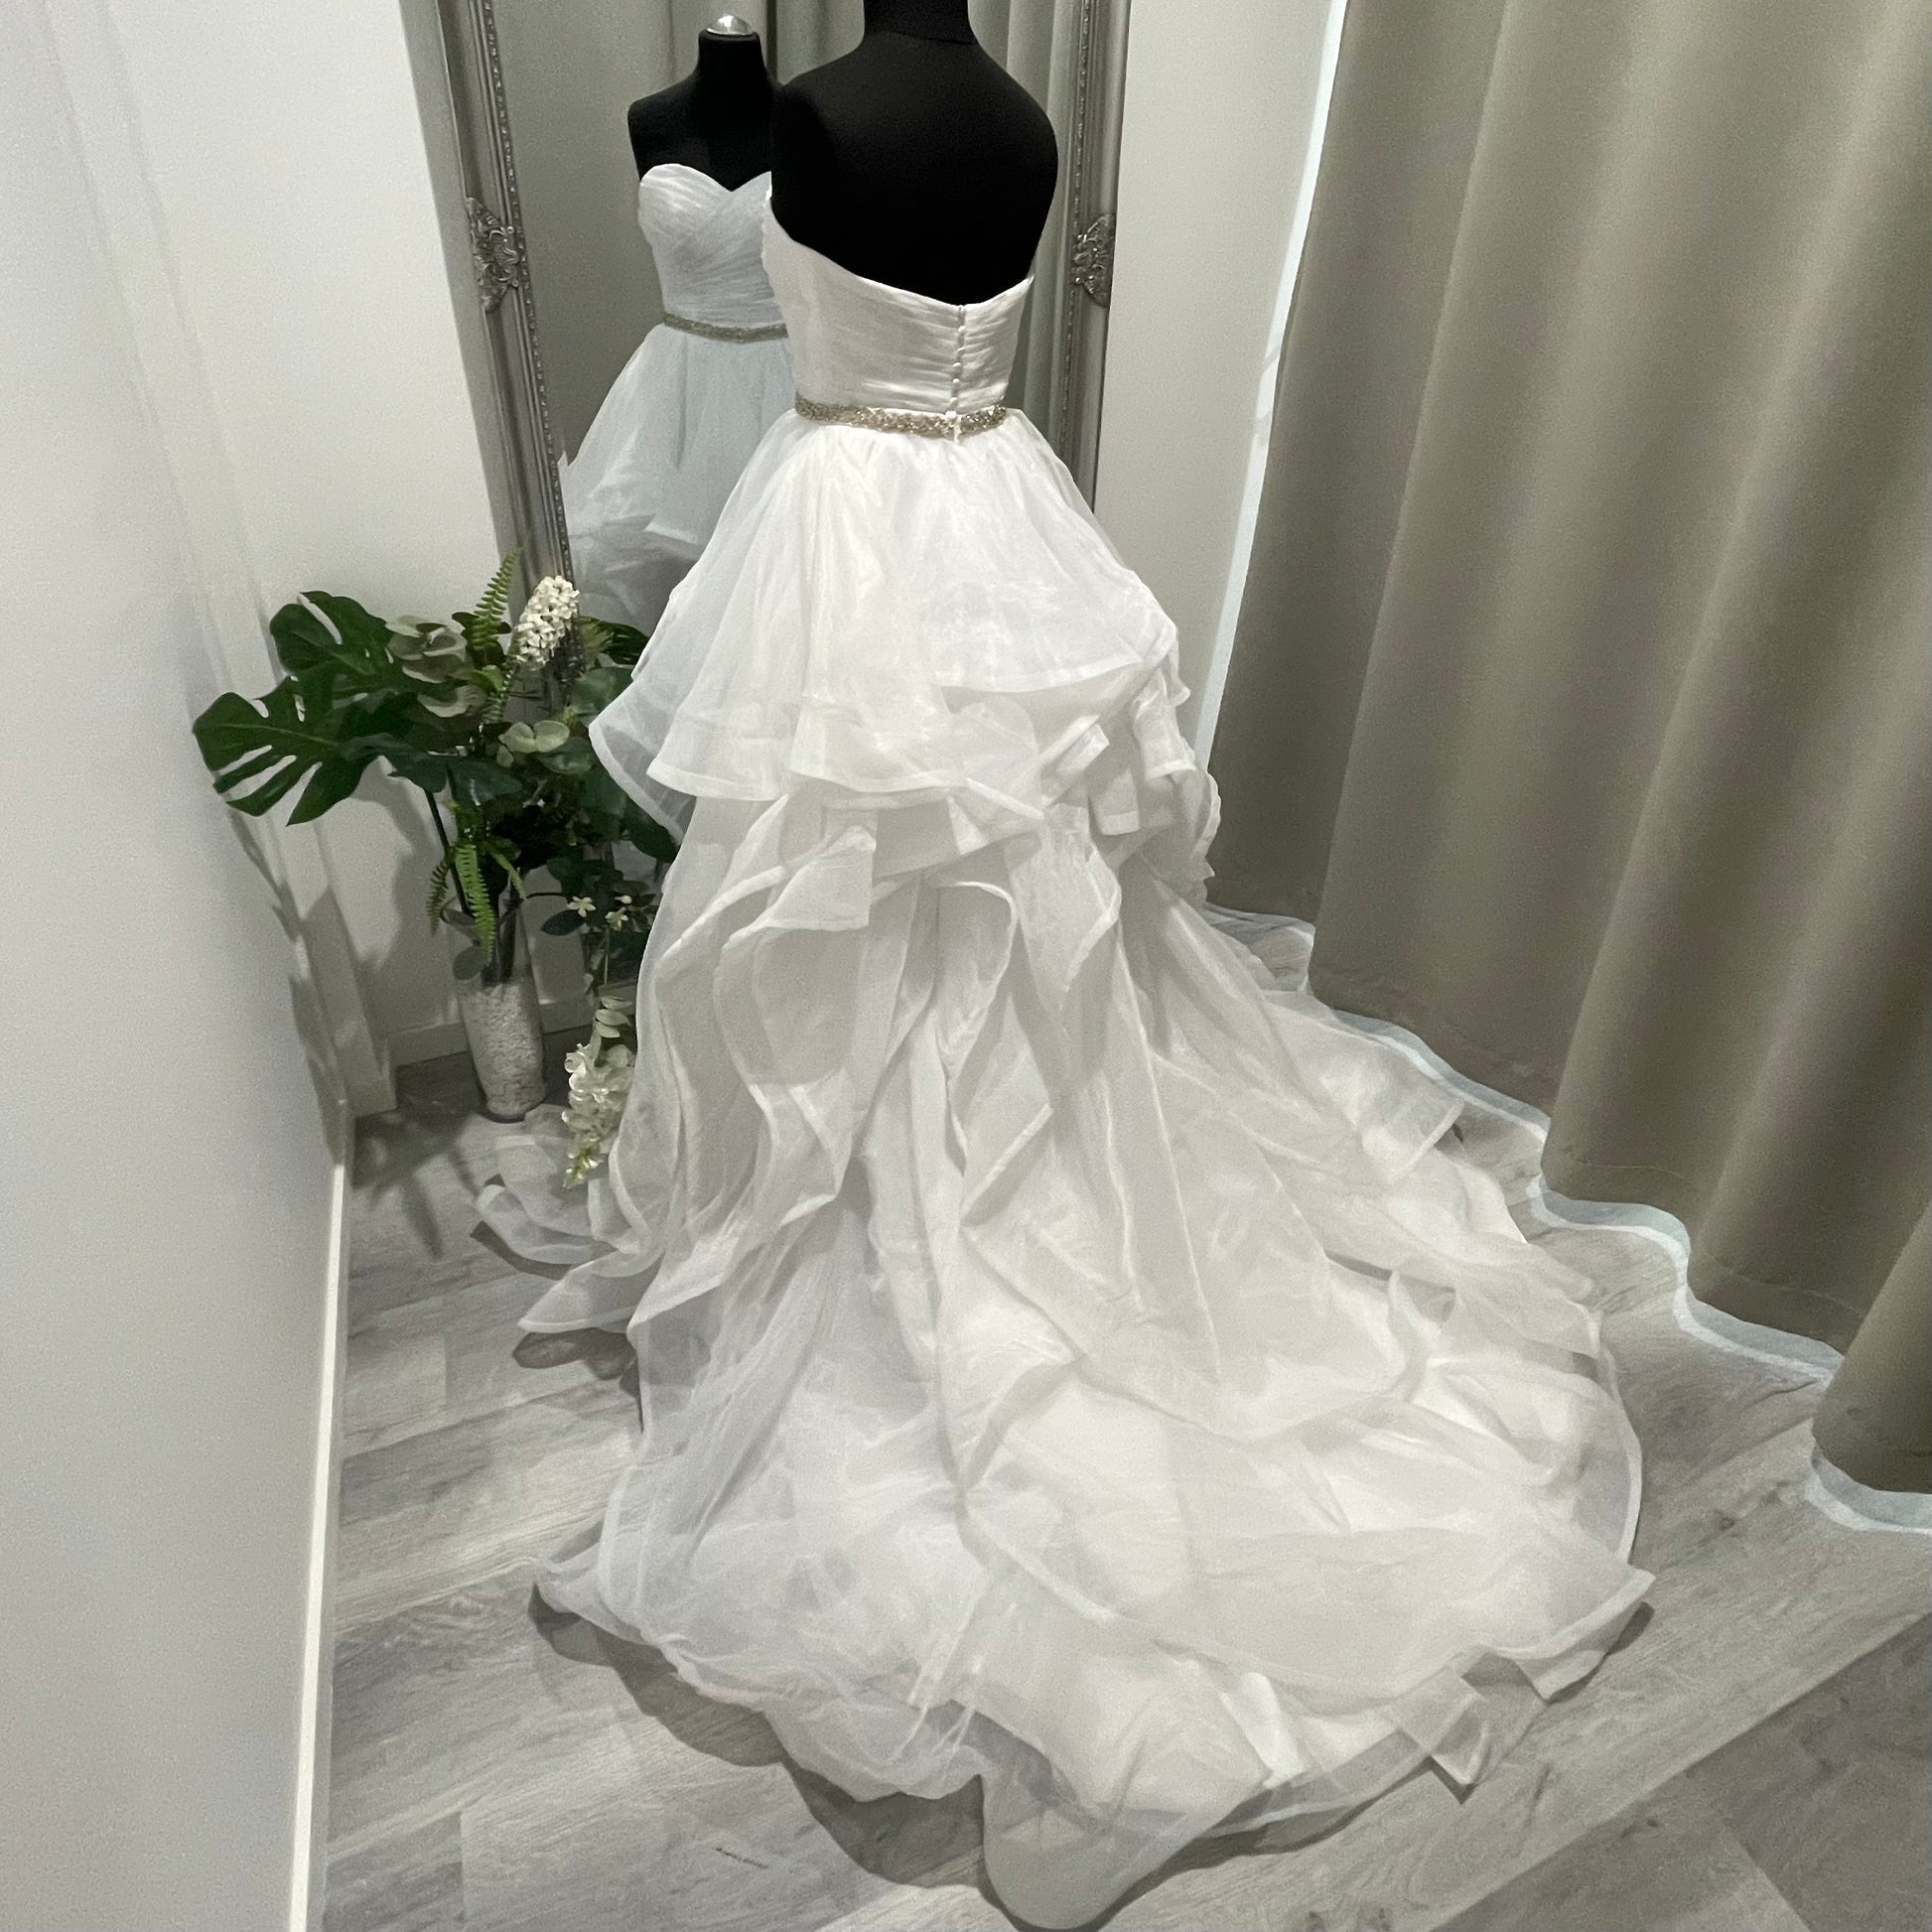 Thelma Gown featuring a strapless sweetheart neckline and a ruffled A-line skirt with horsehair finishing layers.